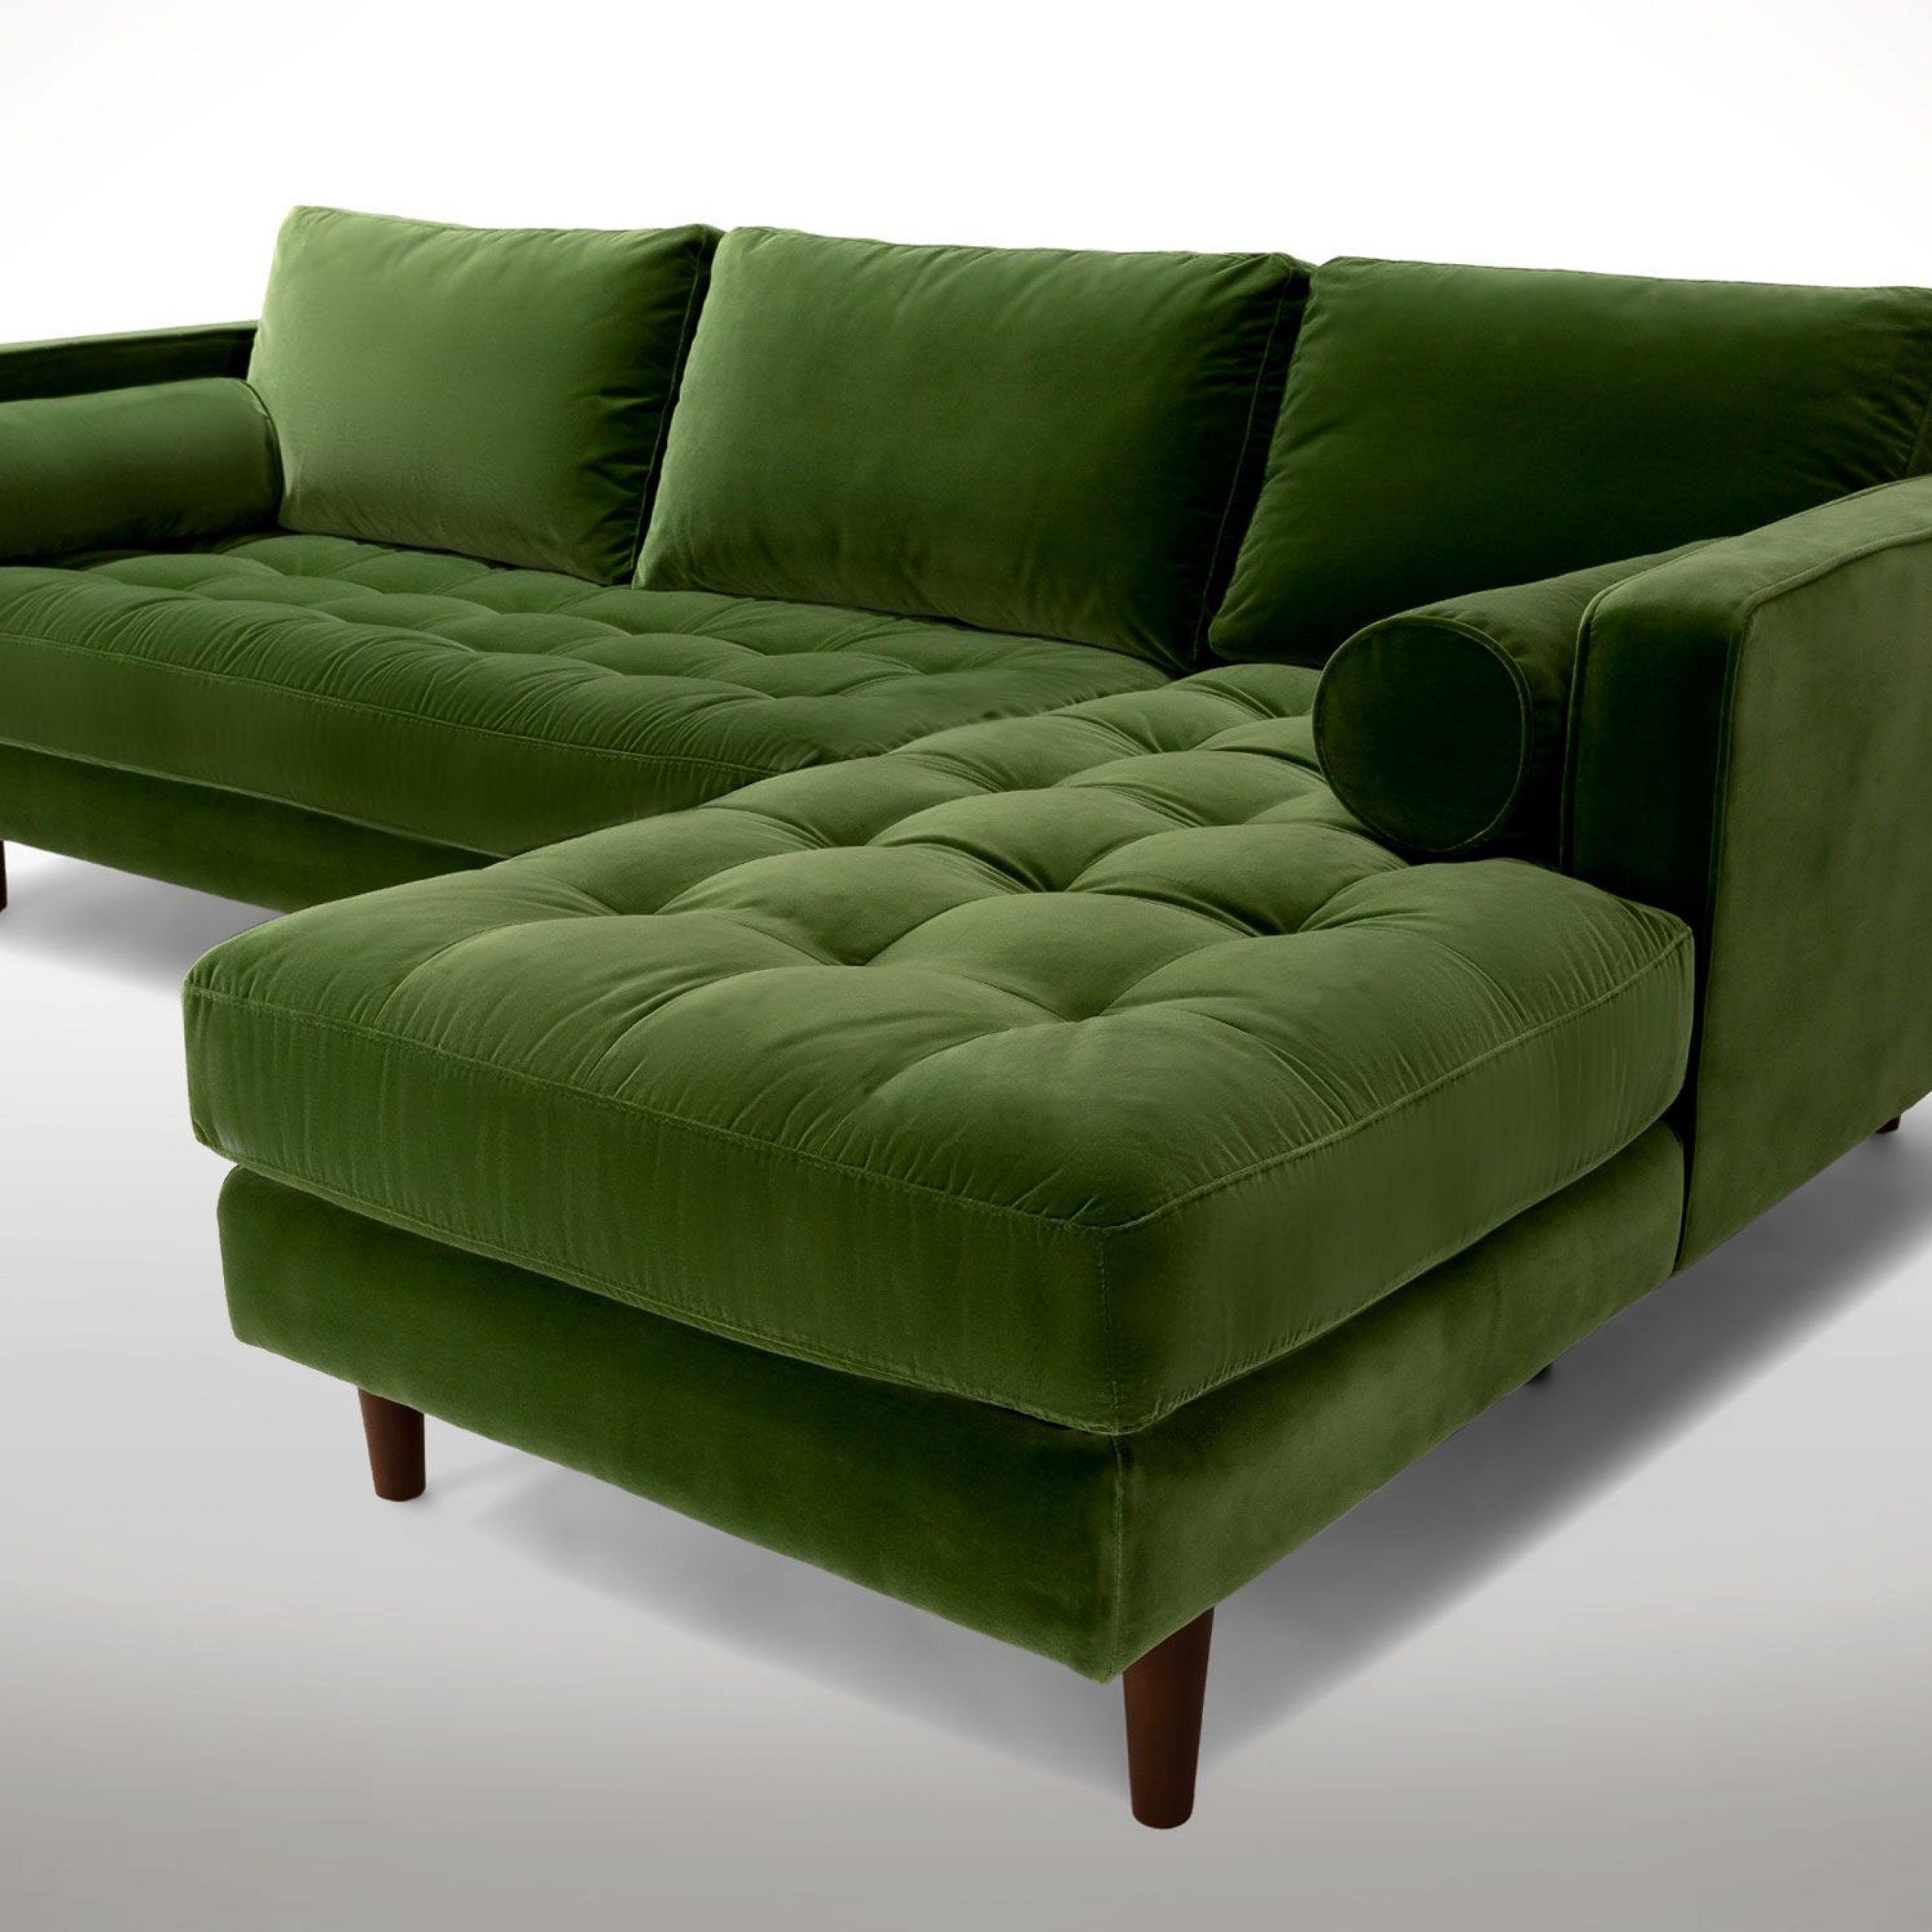 Sven Grass Green Right Sectional Sofa | Sectional Sofa For Florence Mid Century Modern Velvet Right Sectional Sofas (View 10 of 15)